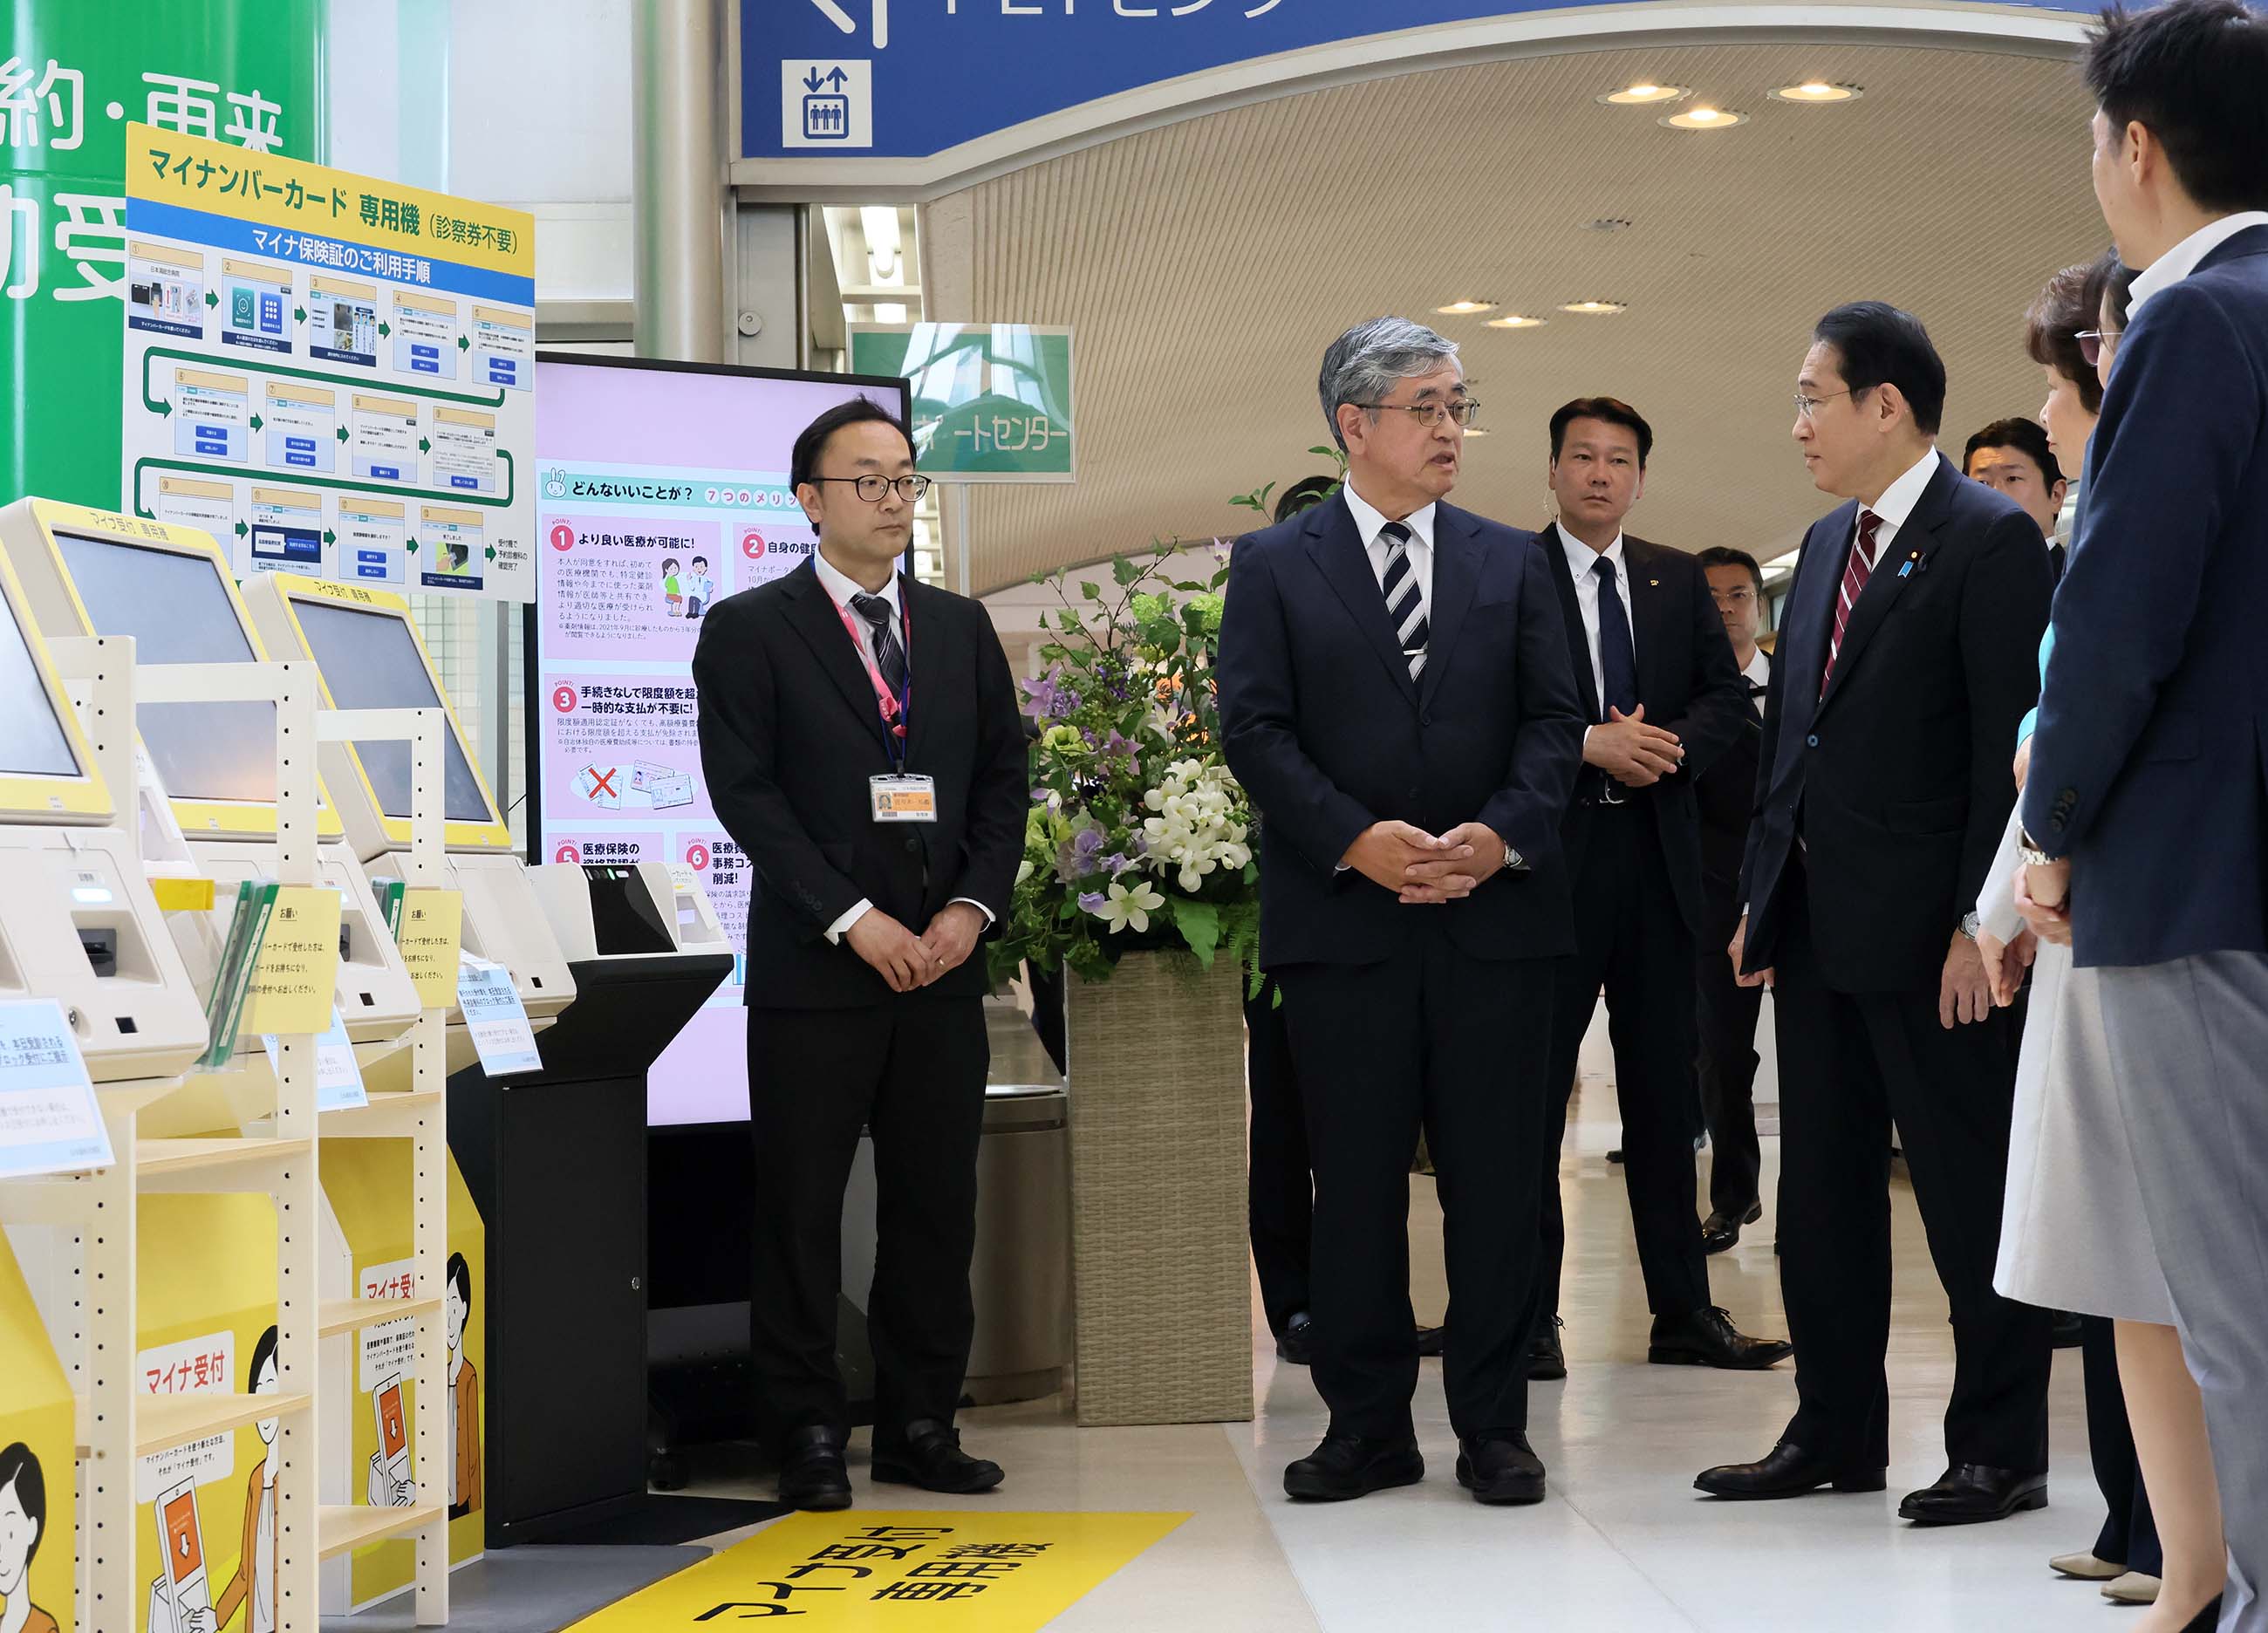 Prime Minister Kishida inspecting reception machines for My Number Card users (1)